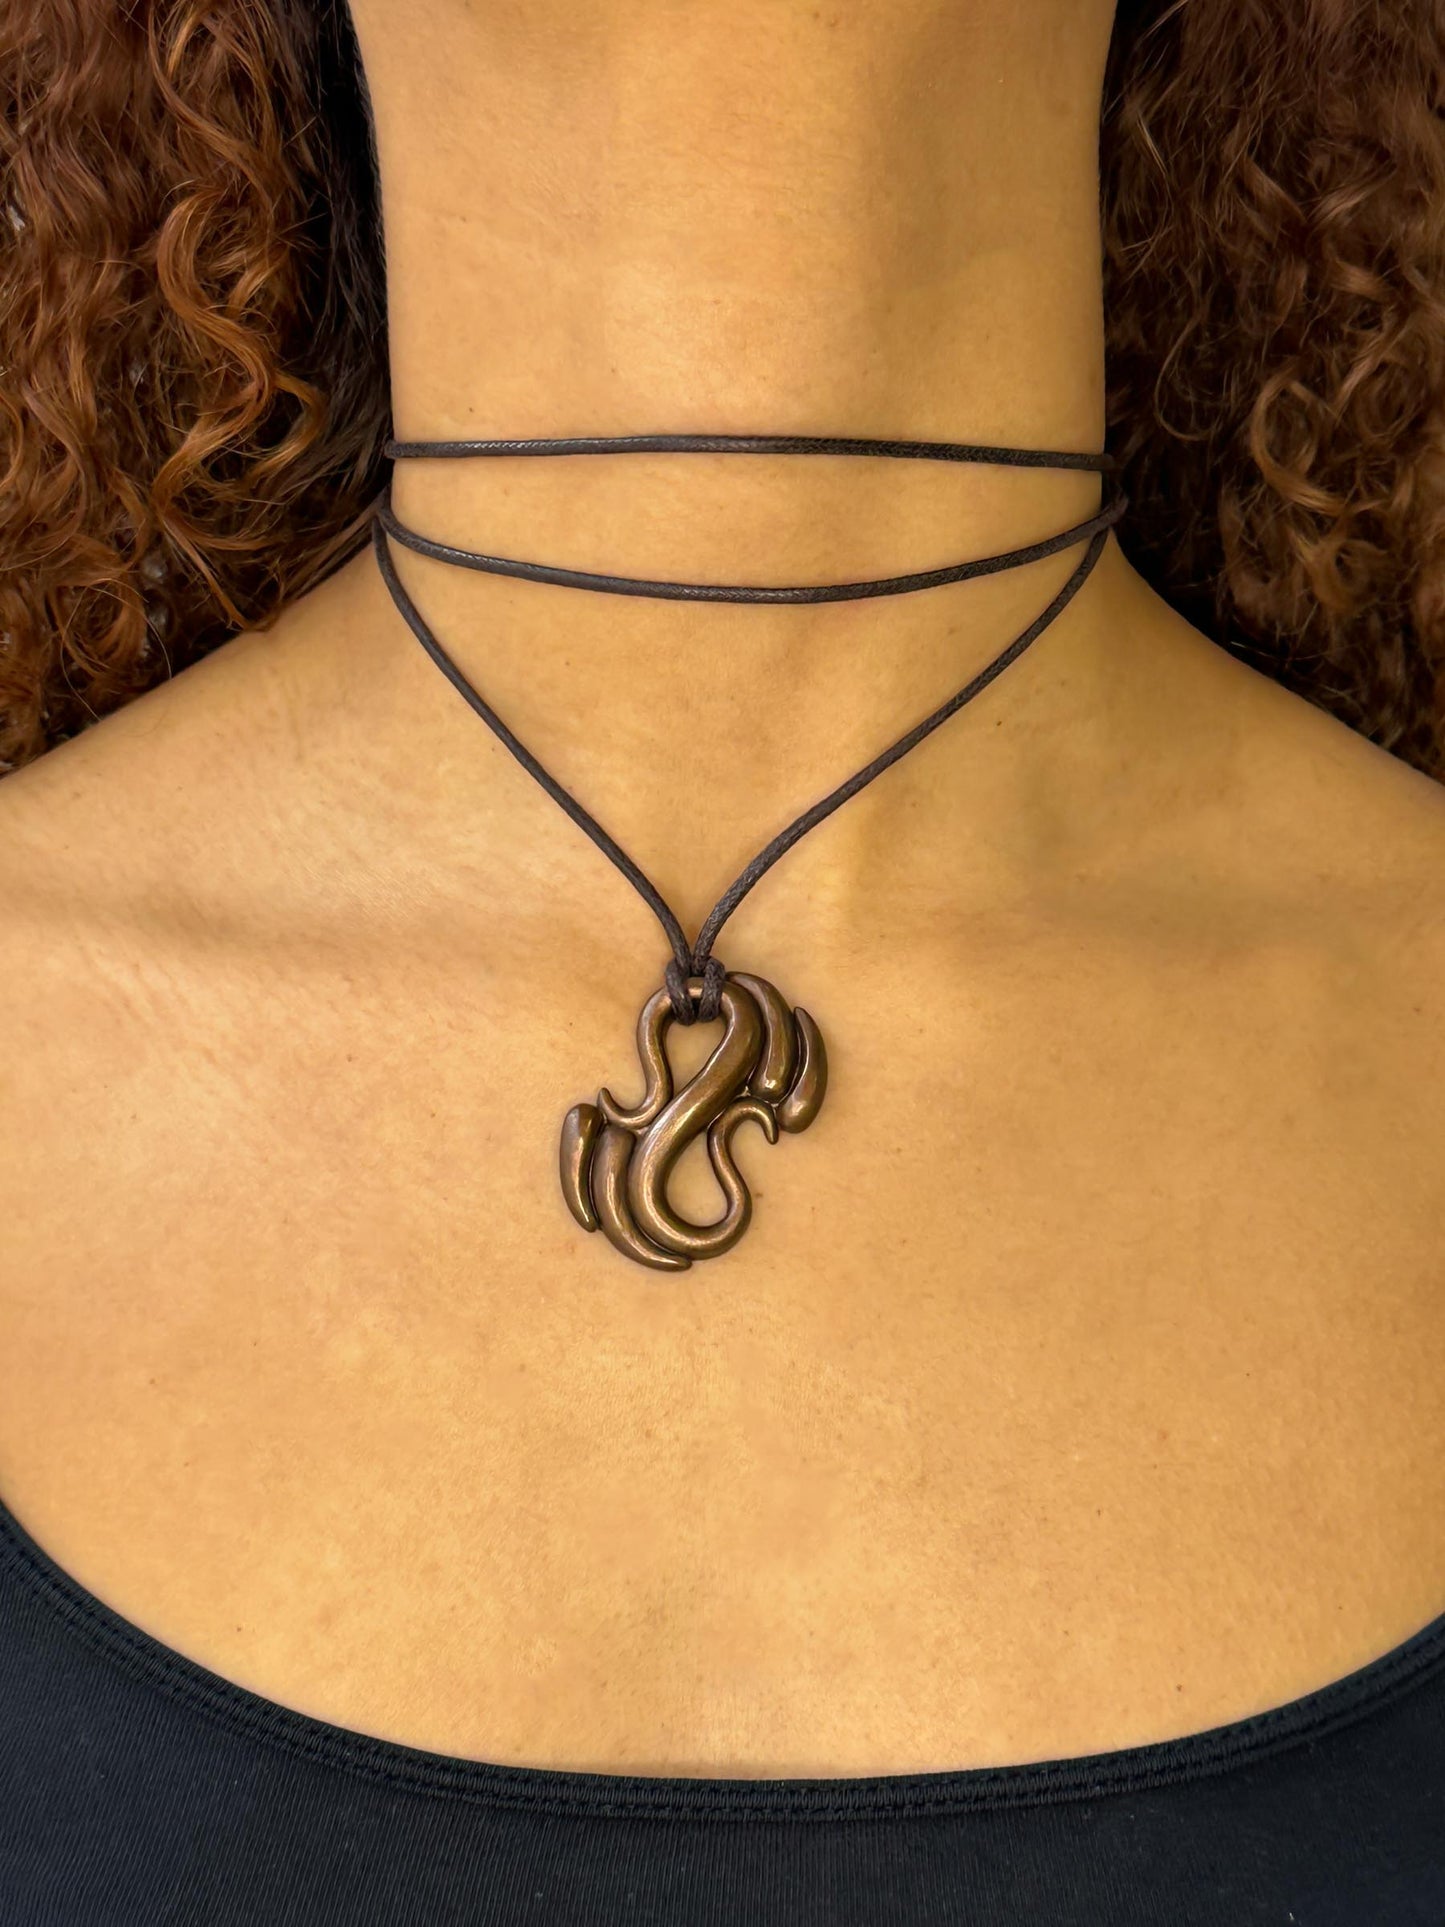 Nerm metallic brown lace necklace